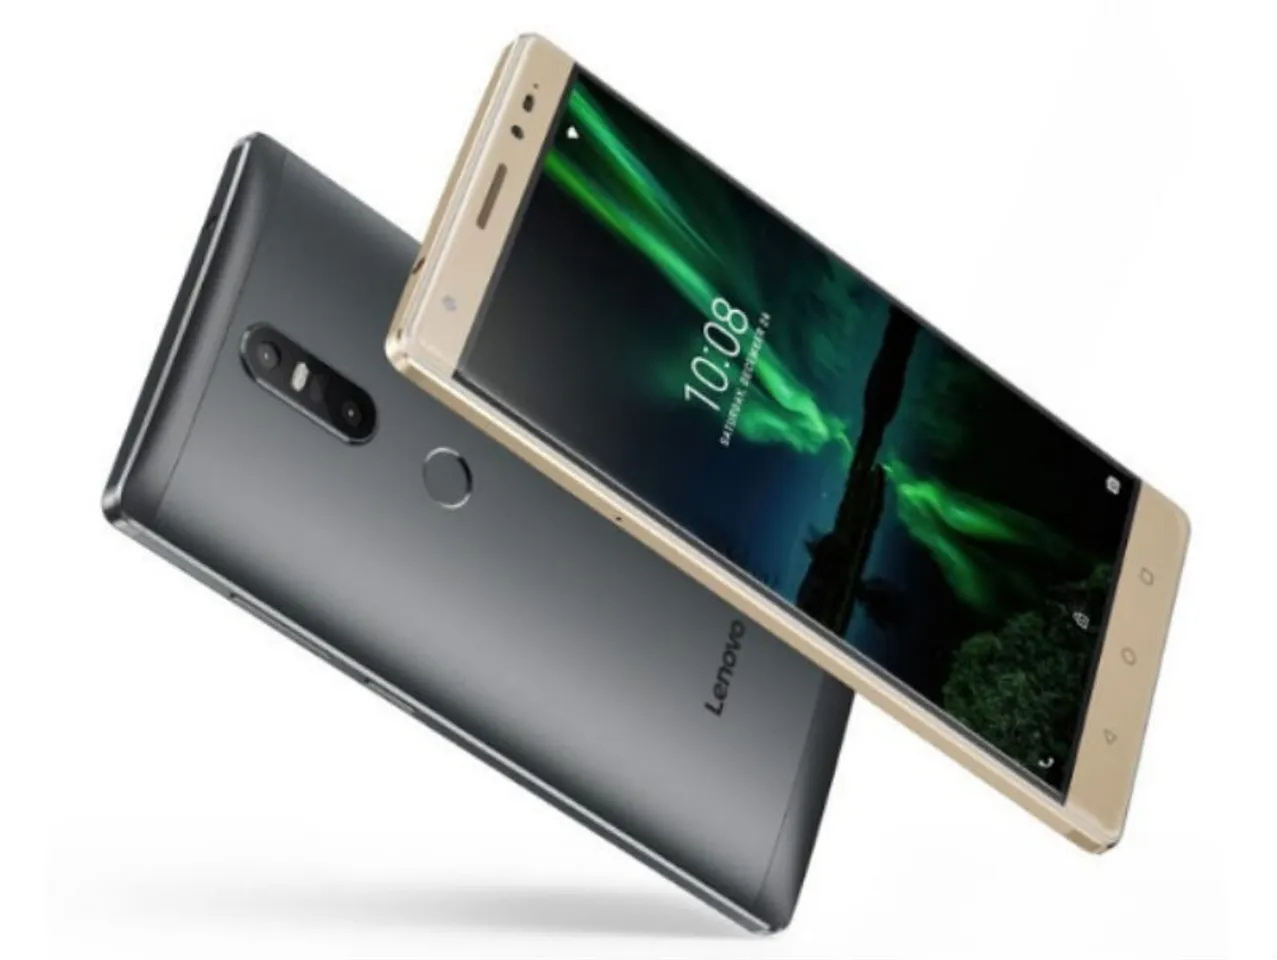 CIOL Lenovo’s non-tango Phab 2 smartphone to be launched in India tomorrow